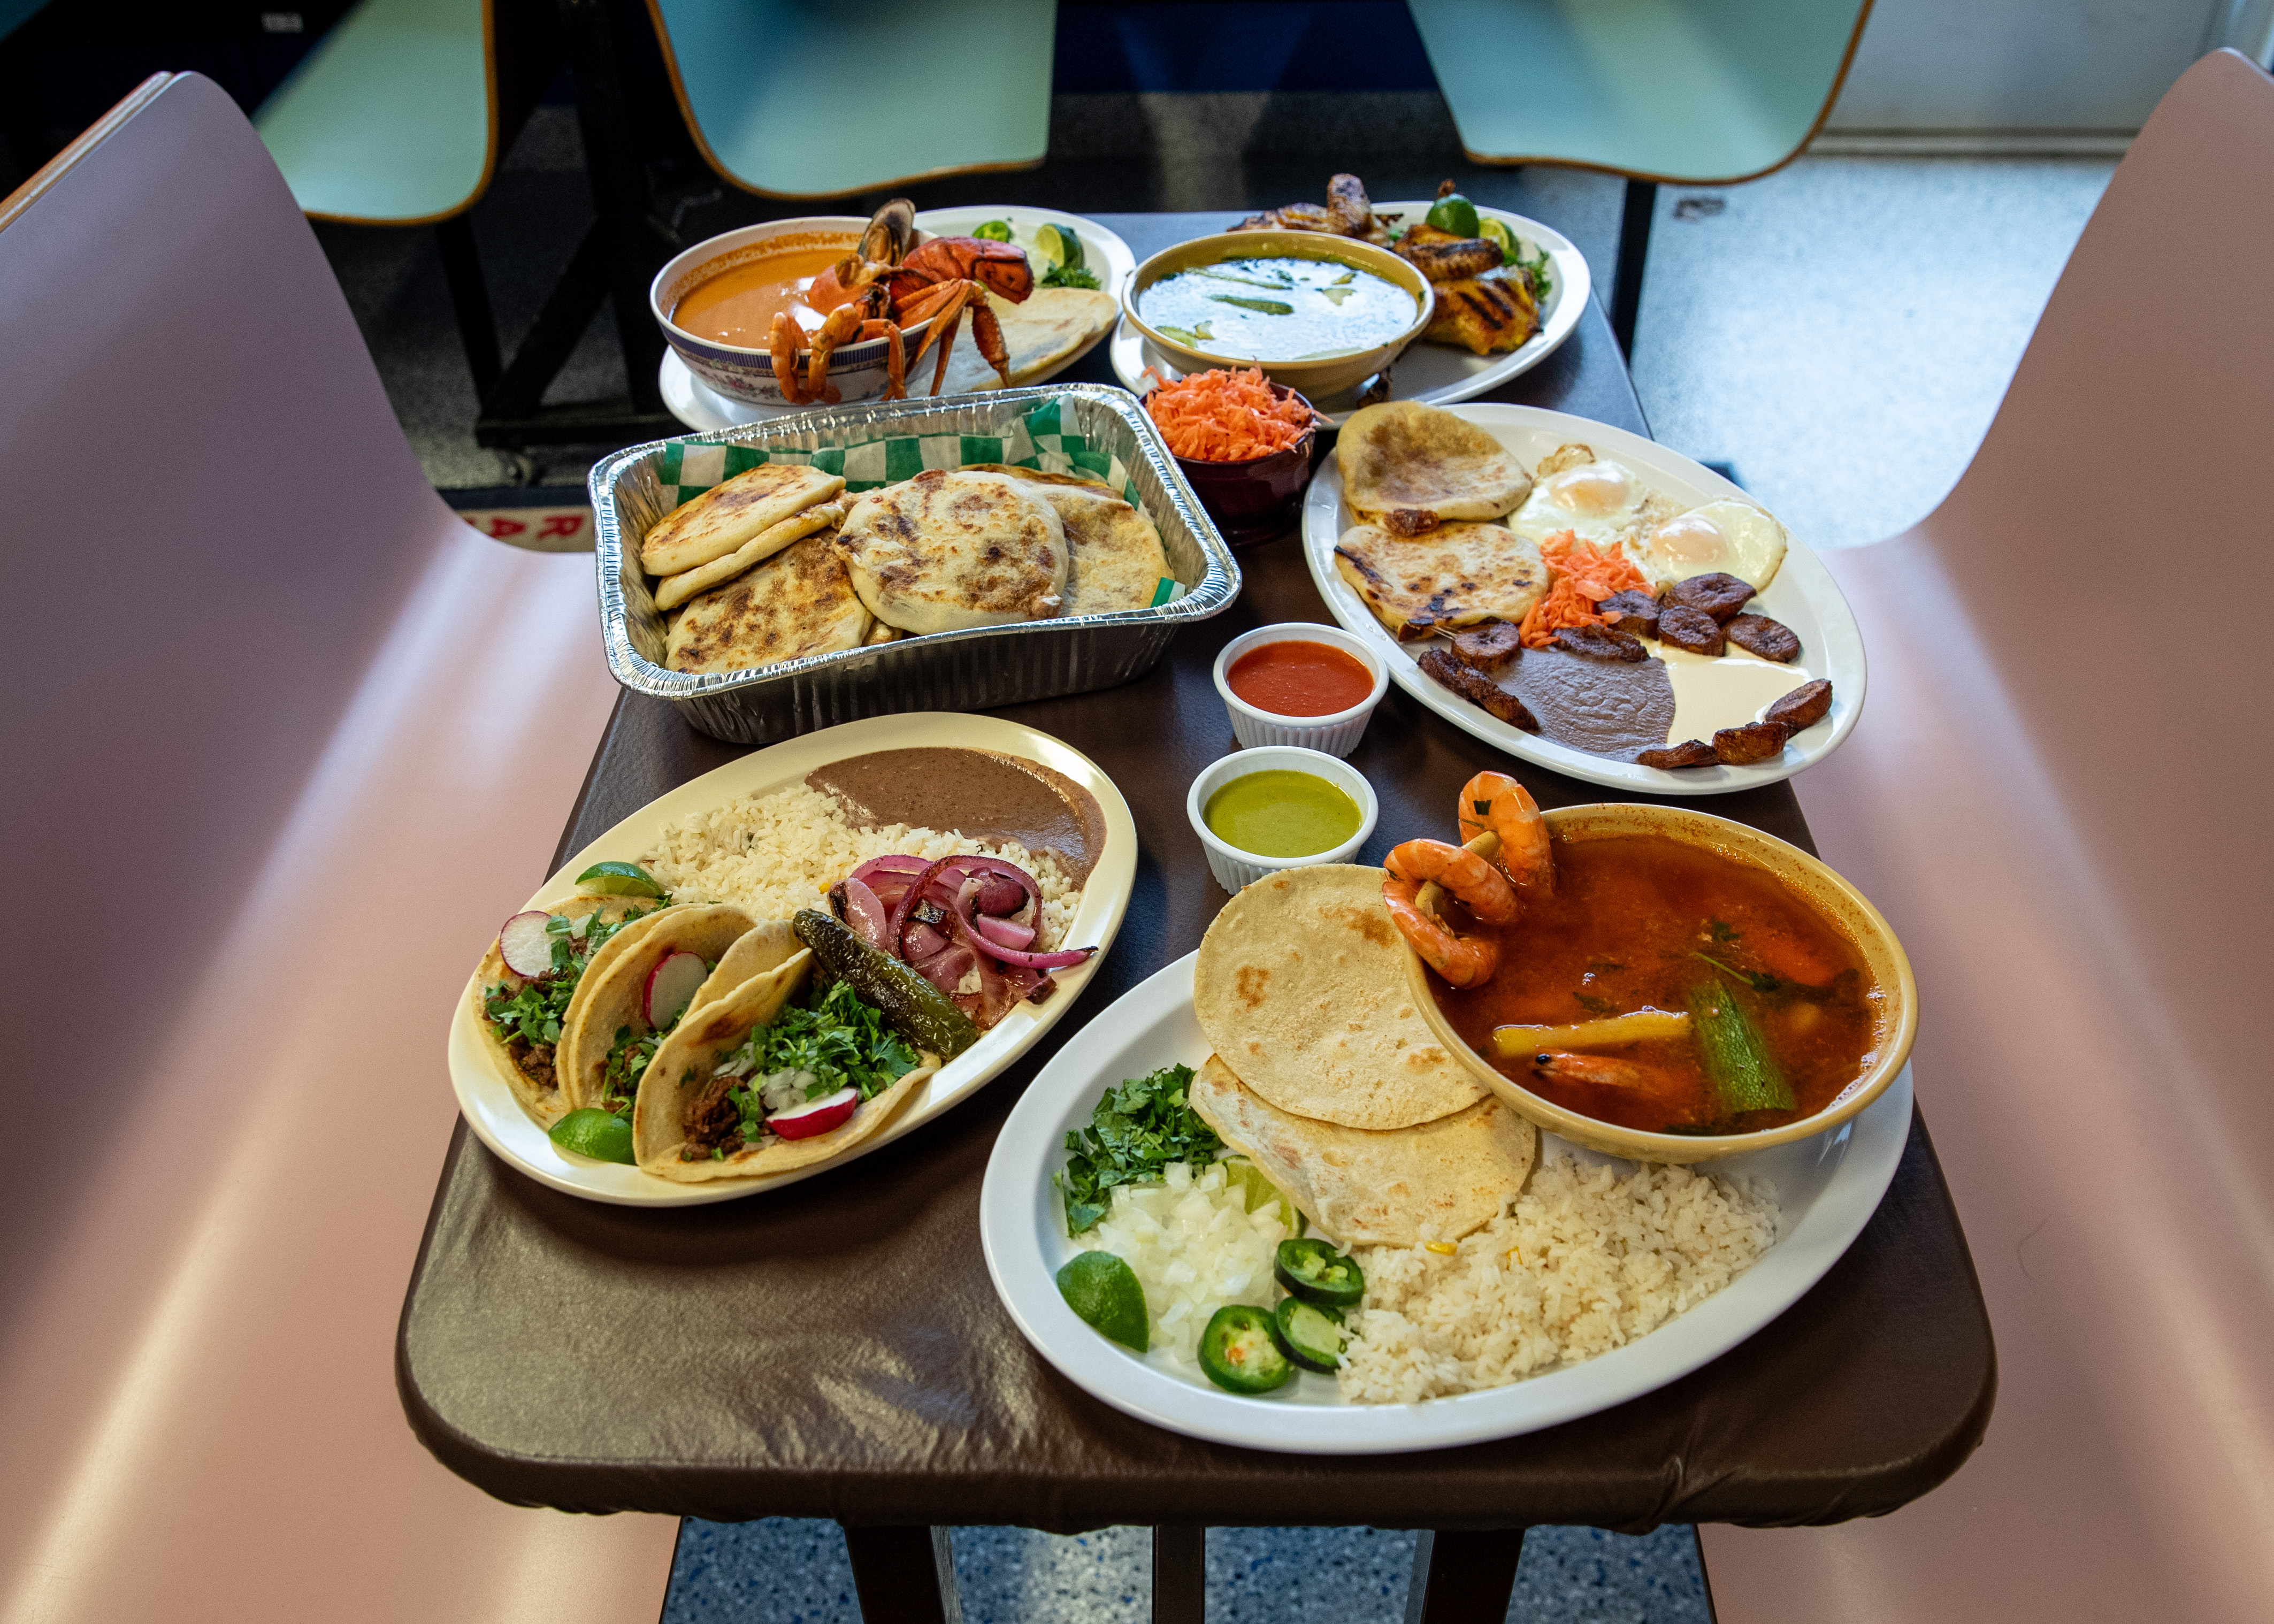 Food at at Pupuseria El Salvador in Wyoming on Thursday, Oct. 19, 2023. (Cory Morse | MLive.com)
